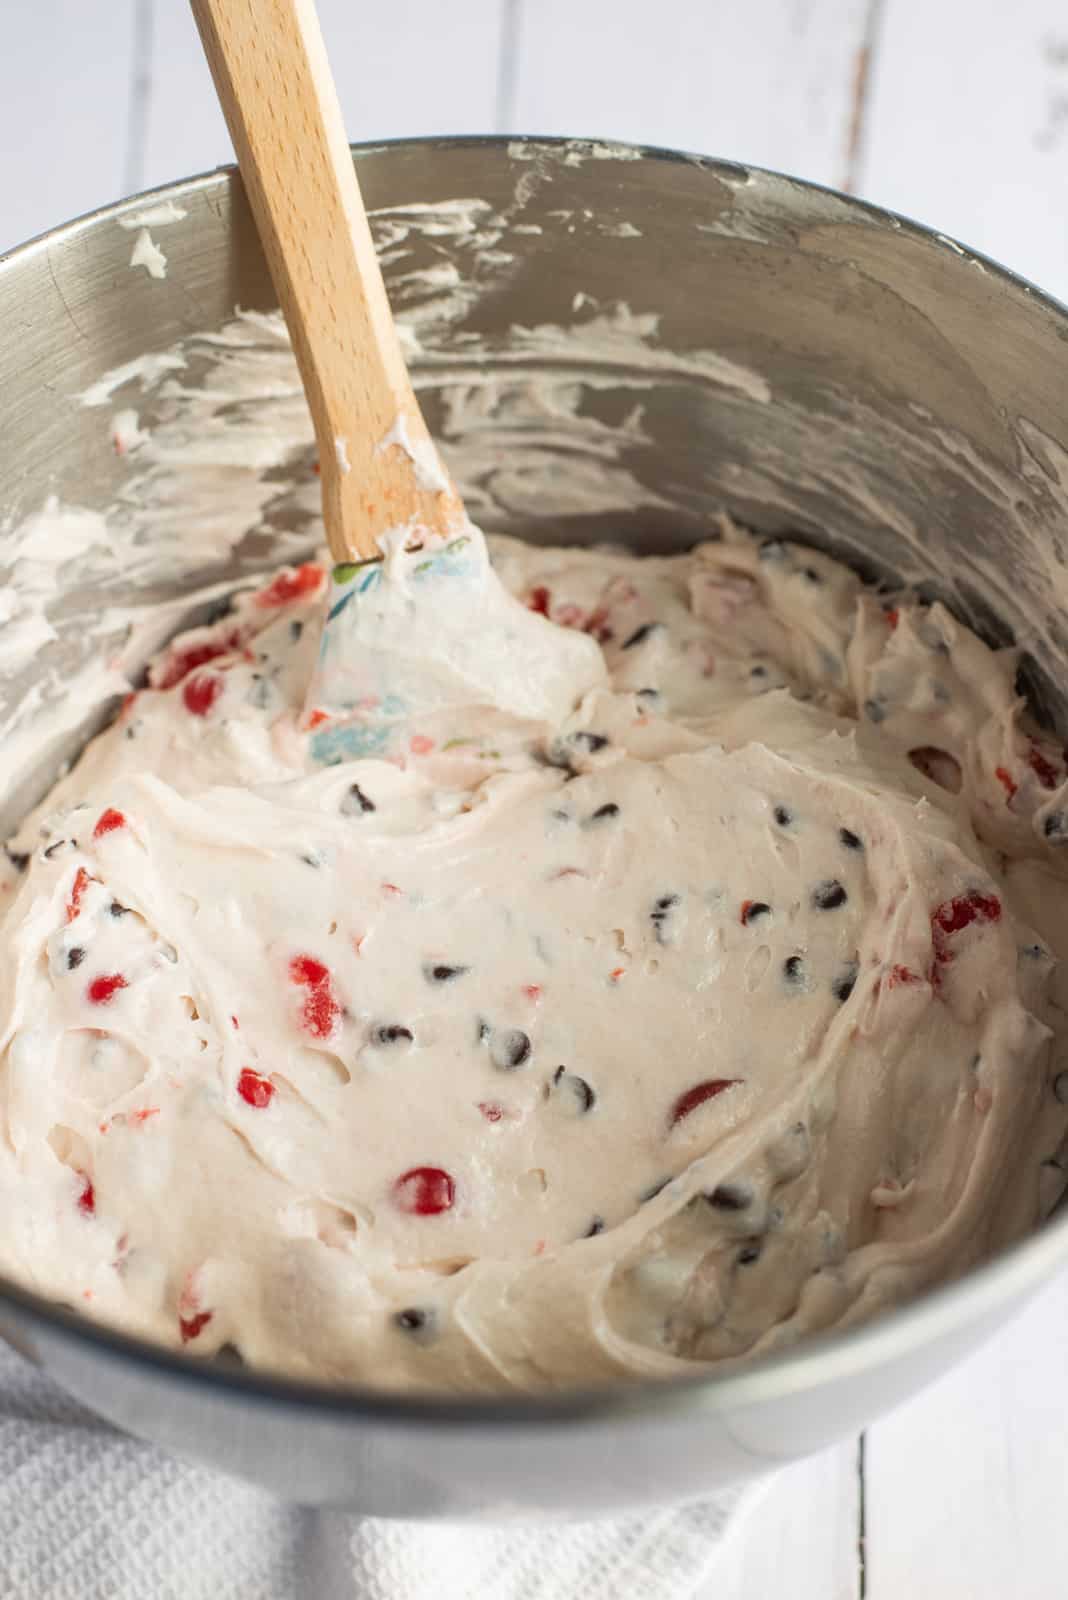 Cherries and chocolate chips mixed into batter.